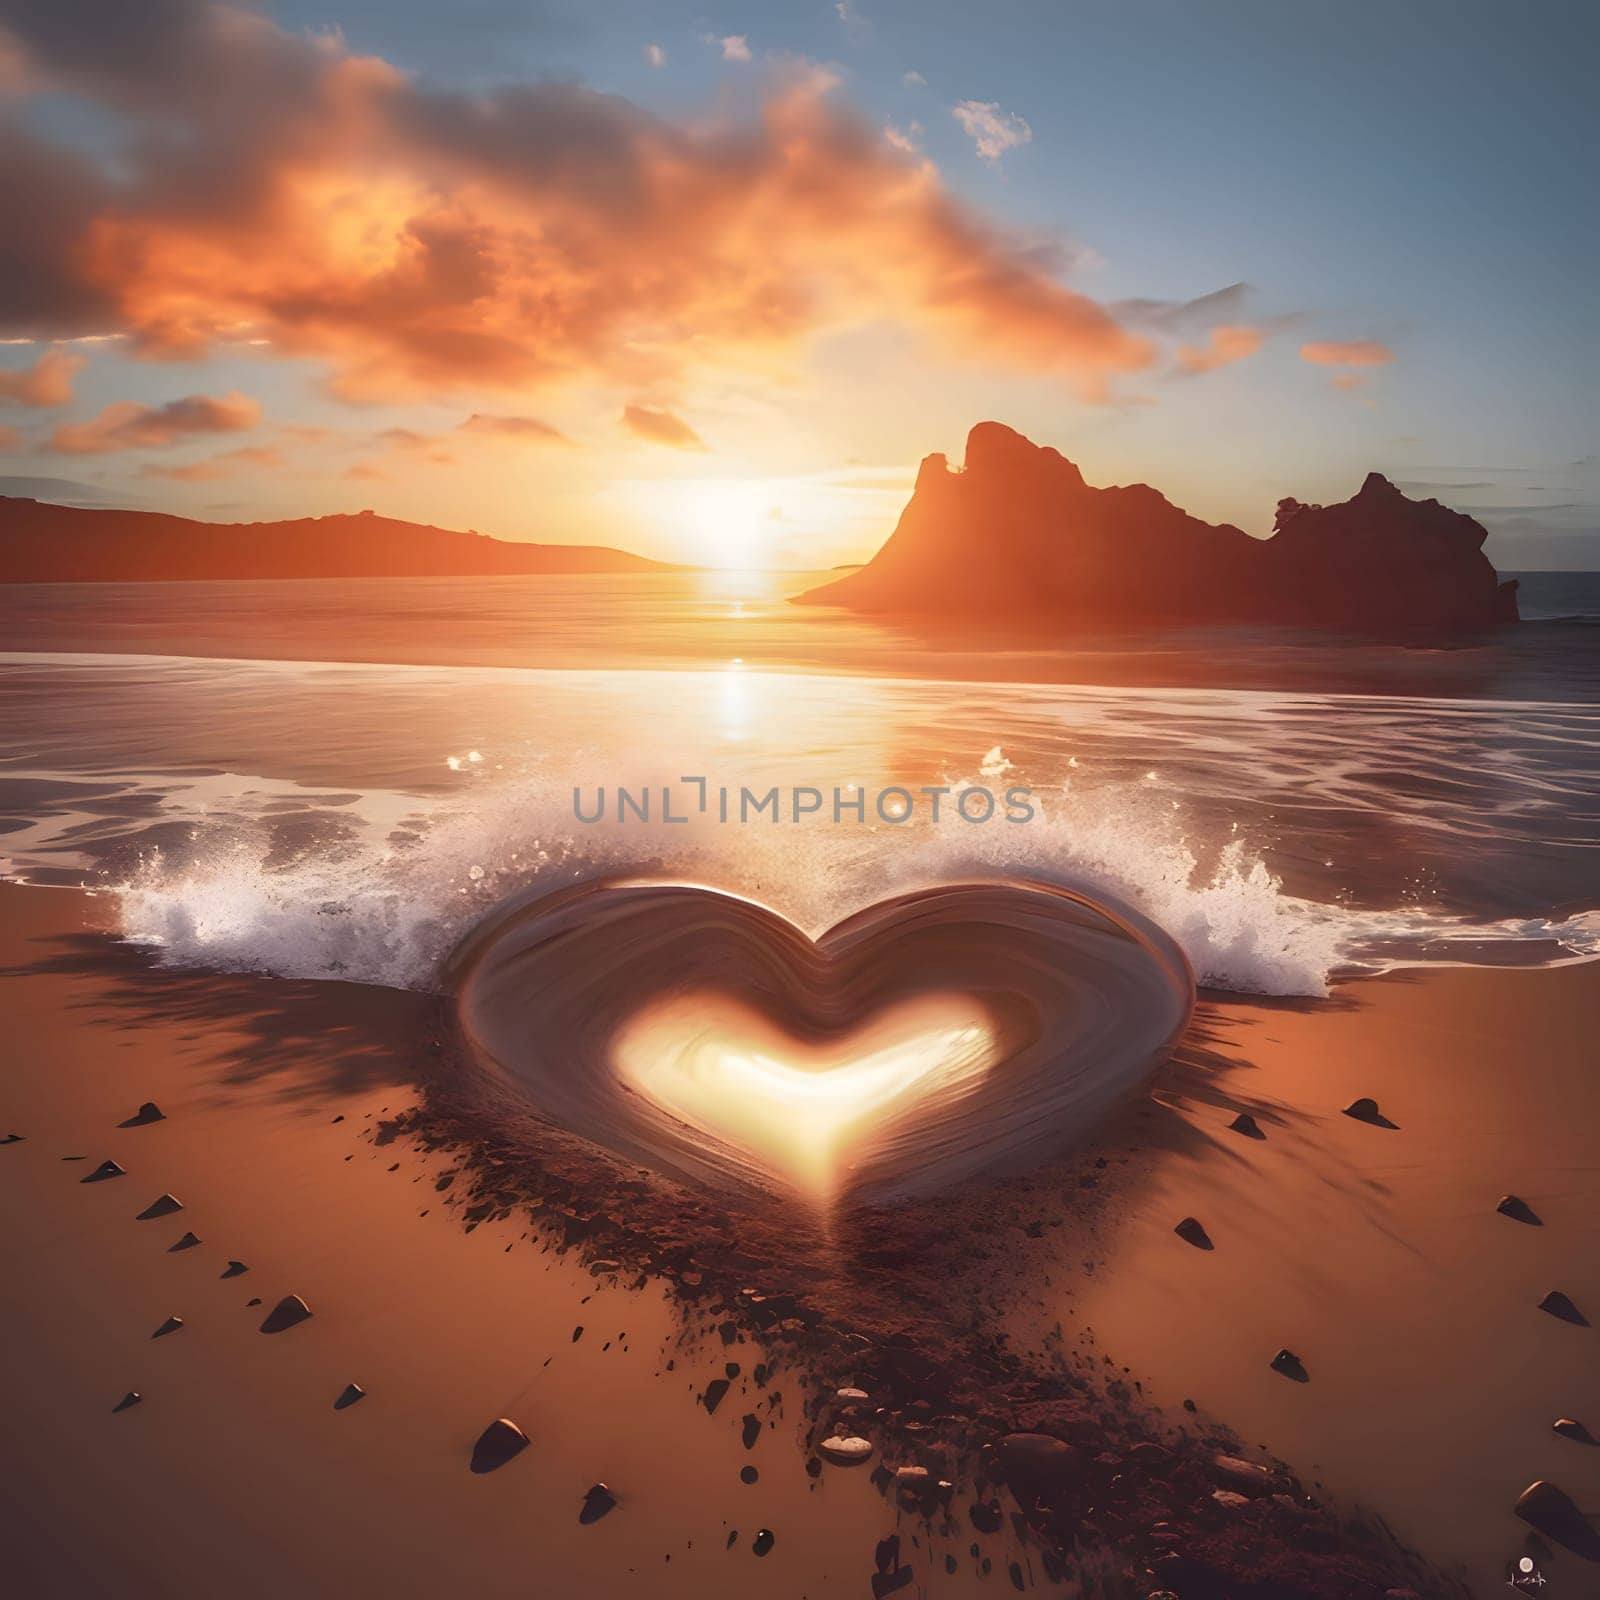 Heart drawn on the sand doused with water, sunset mountains in the background. Heart as a symbol of affection and love. The time of falling in love and love.